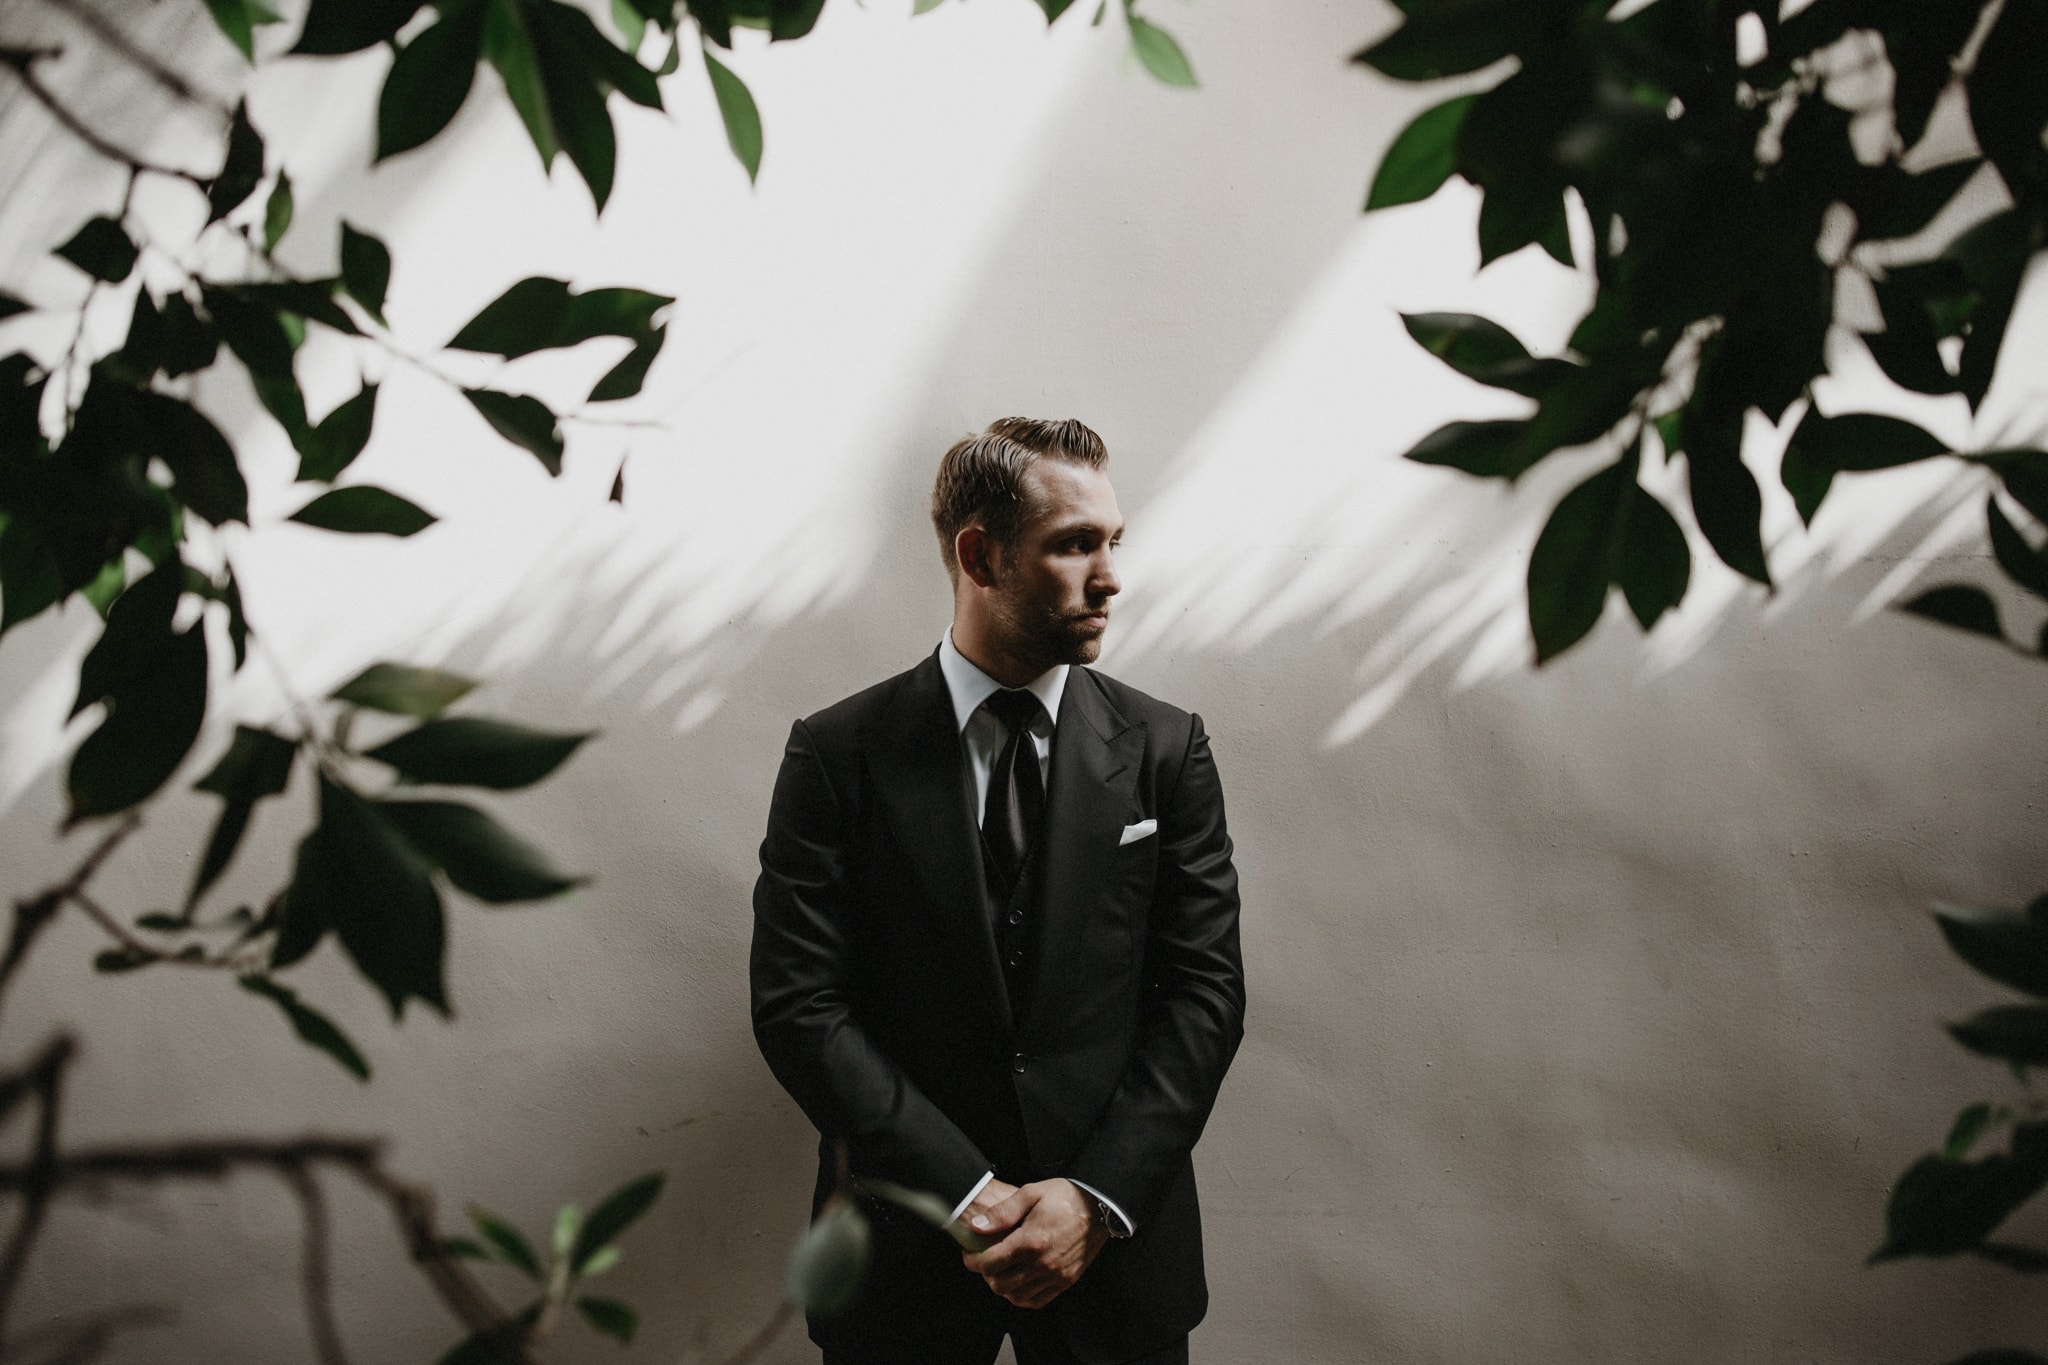 A handsome groom in a black suit stands against a white wall surrounded by trees at The Resort at Pelican Hill for wedding photos with j.olson weddings.